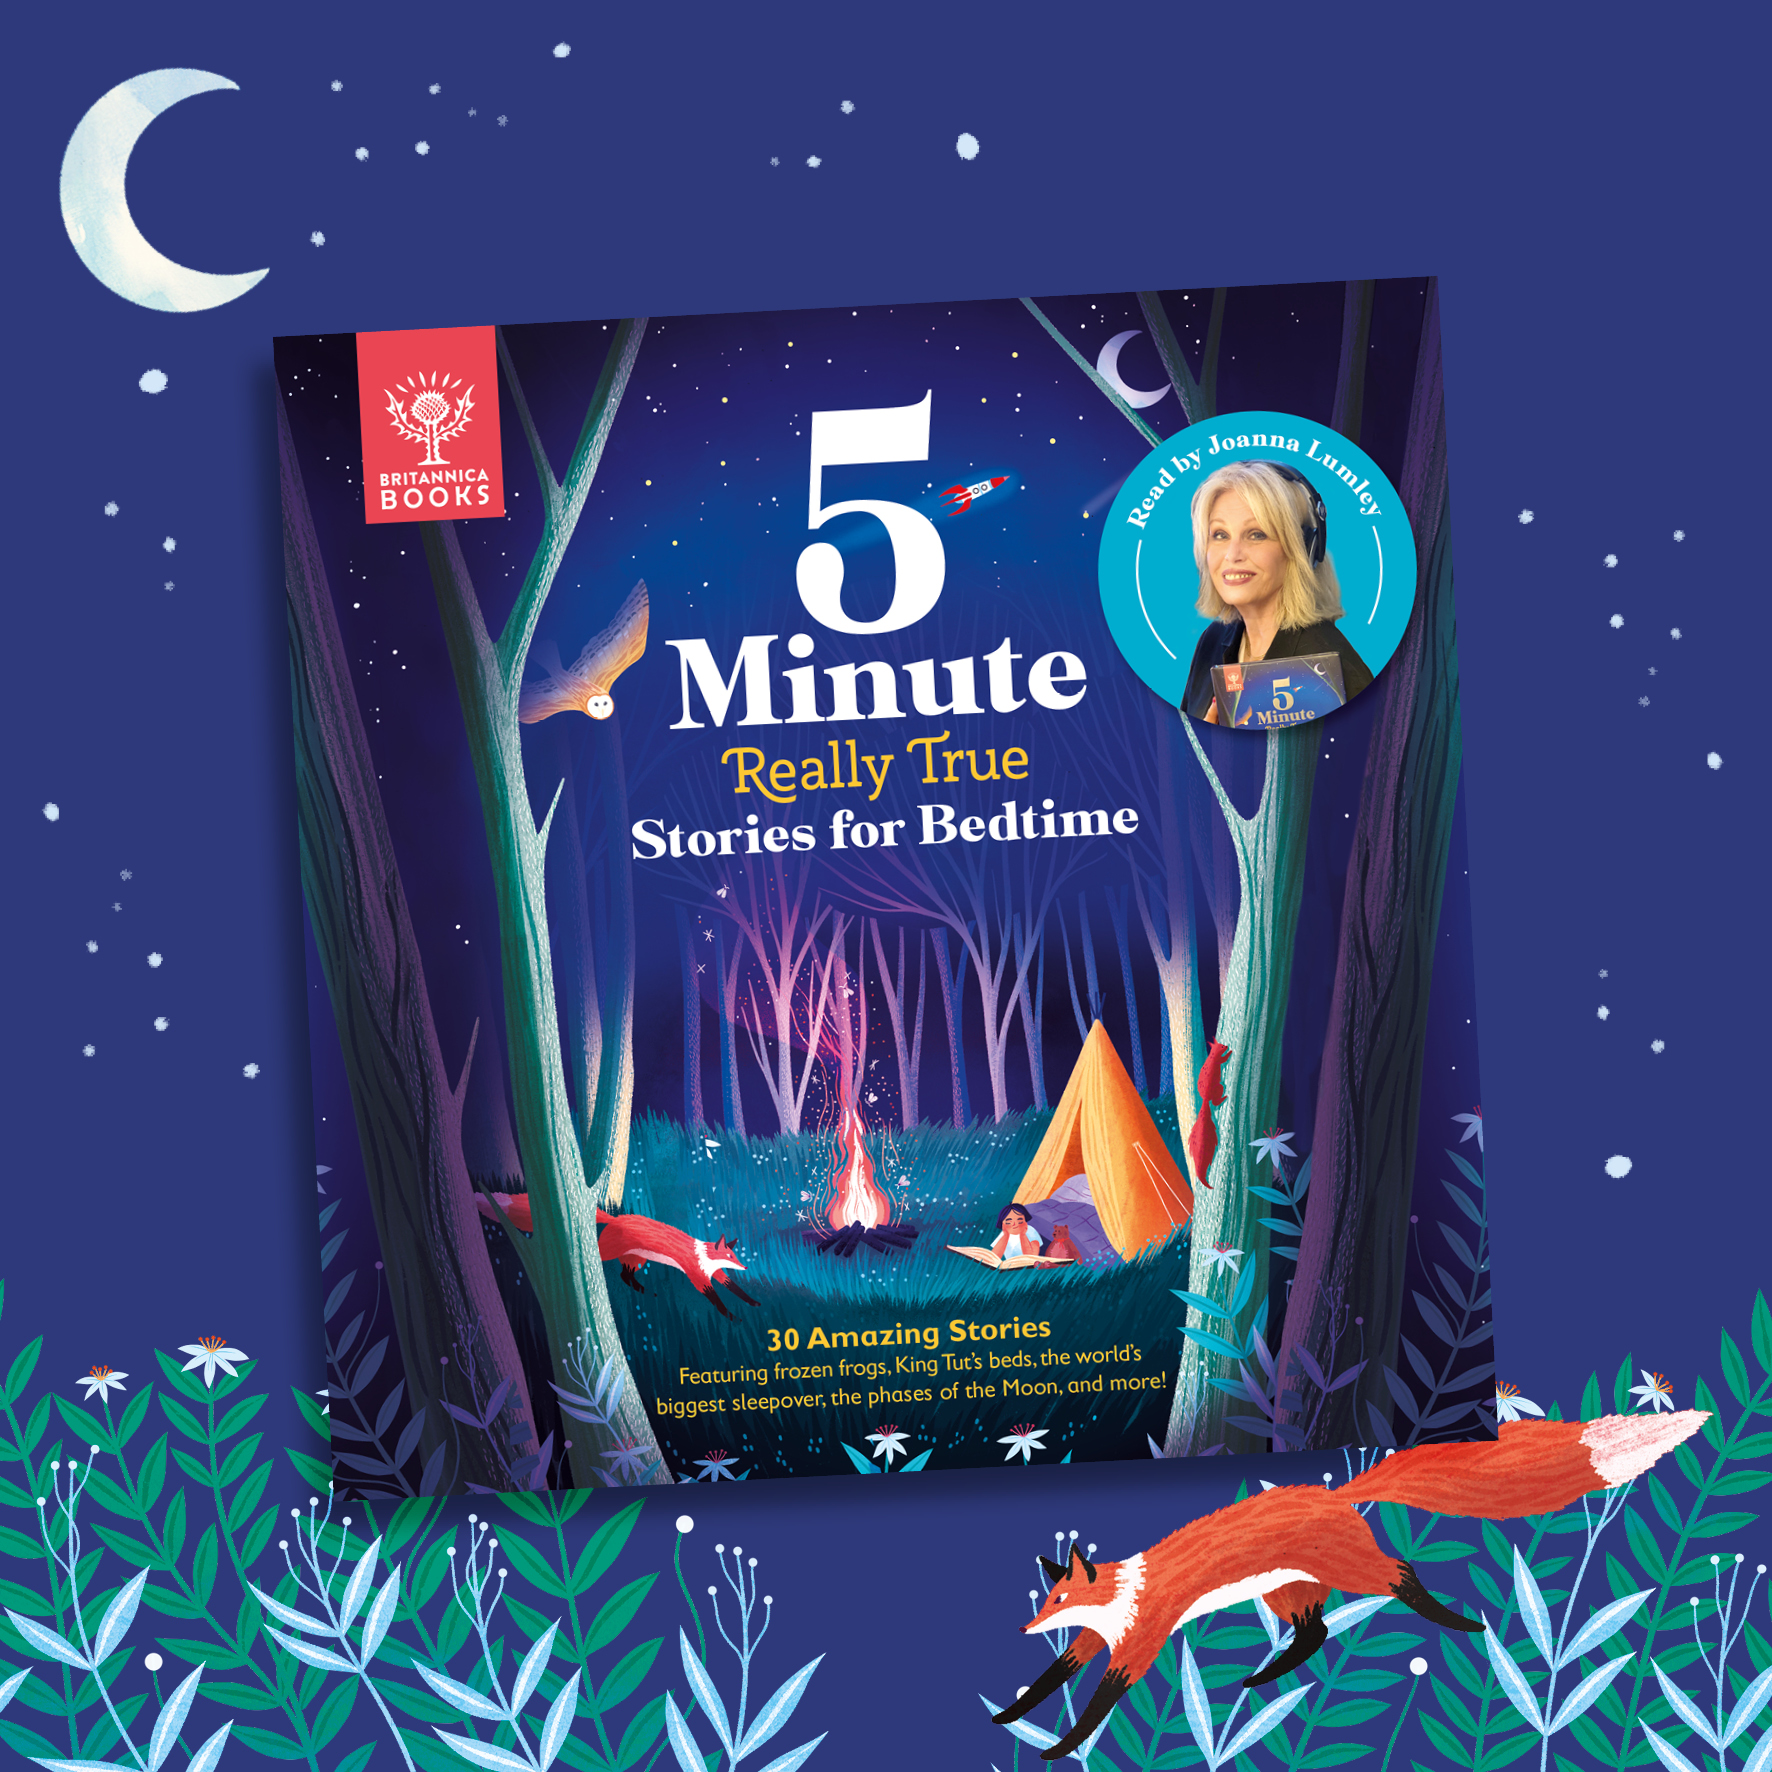 Joanna Lumley narrates <i>5-Minute Really True Stories for Bedtime</i> Audiobook!